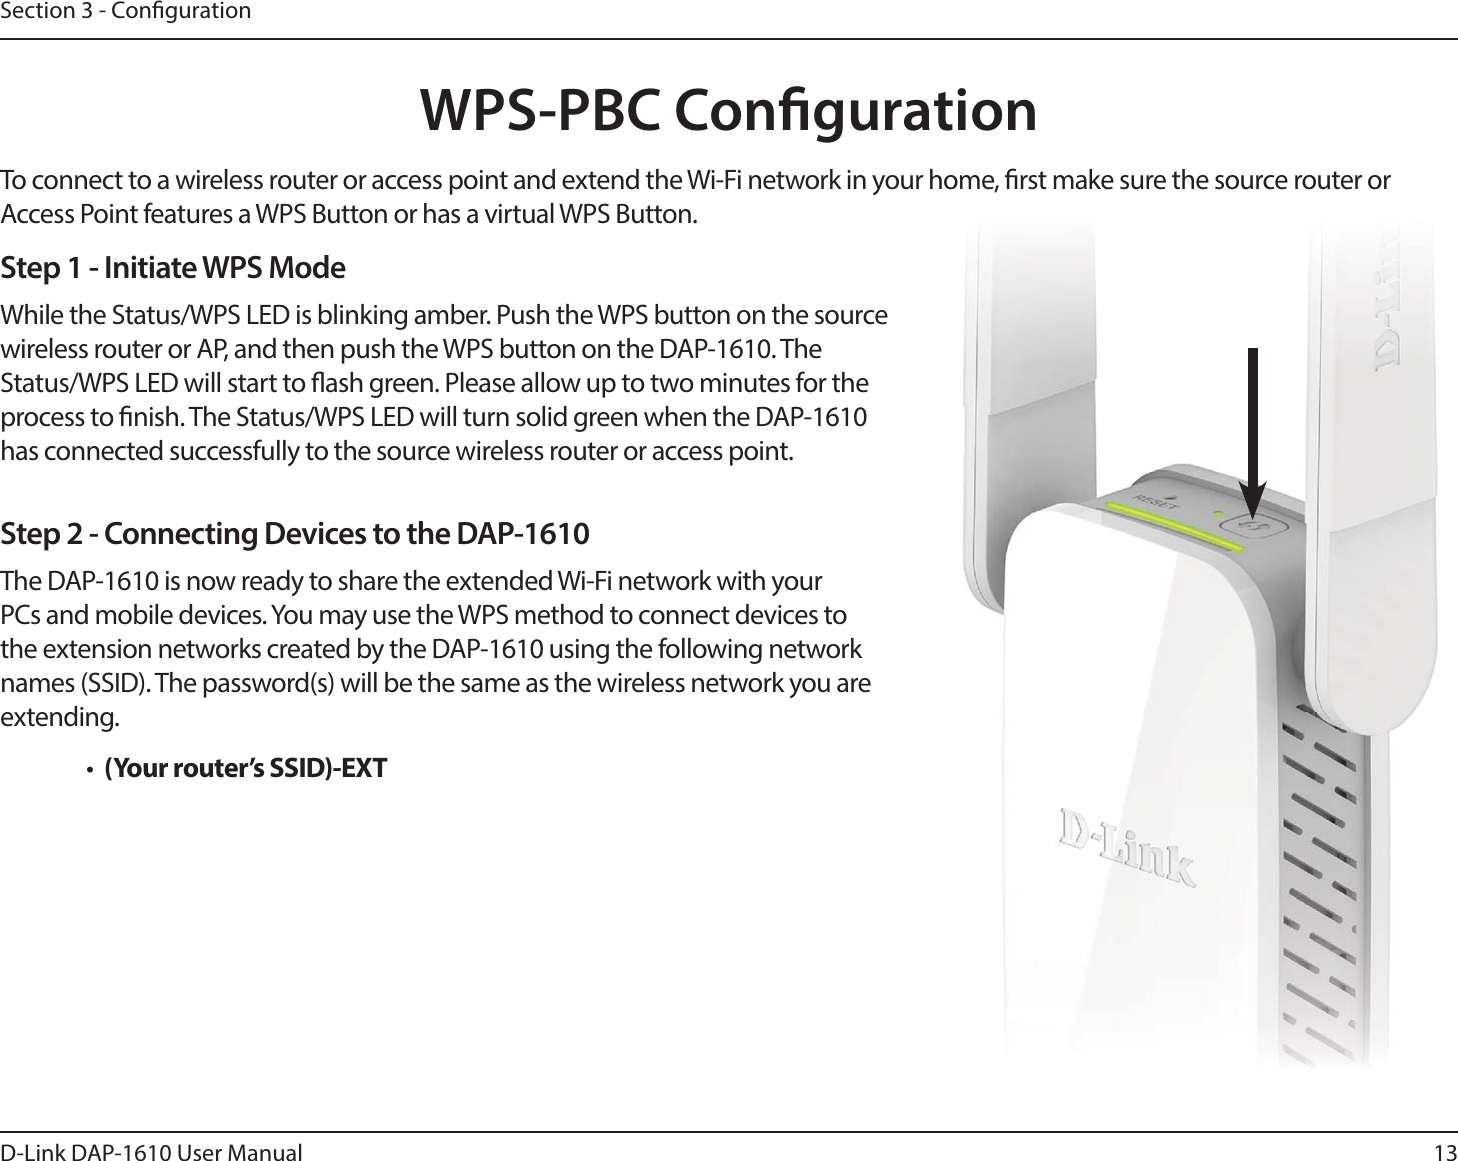 13D-Link DAP-1610 User ManualSection 3 - CongurationWPS-PBC CongurationStep 1 - Initiate WPS ModeWhile the Status/WPS LED is blinking amber. Push the WPS button on the source wireless router or AP, and then push the WPS button on the DAP-1610. The Status/WPS LED will start to ash green. Please allow up to two minutes for the process to nish. The Status/WPS LED will turn solid green when the DAP-1610 has connected successfully to the source wireless router or access point.Step 2 - Connecting Devices to the DAP-1610The DAP-1610 is now ready to share the extended Wi-Fi network with your PCs and mobile devices. You may use the WPS method to connect devices to the extension networks created by the DAP-1610 using the following network names (SSID). The password(s) will be the same as the wireless network you are extending.•  (Your router’s SSID)-EXTTo connect to a wireless router or access point and extend the Wi-Fi network in your home, rst make sure the source router or Access Point features a WPS Button or has a virtual WPS Button.